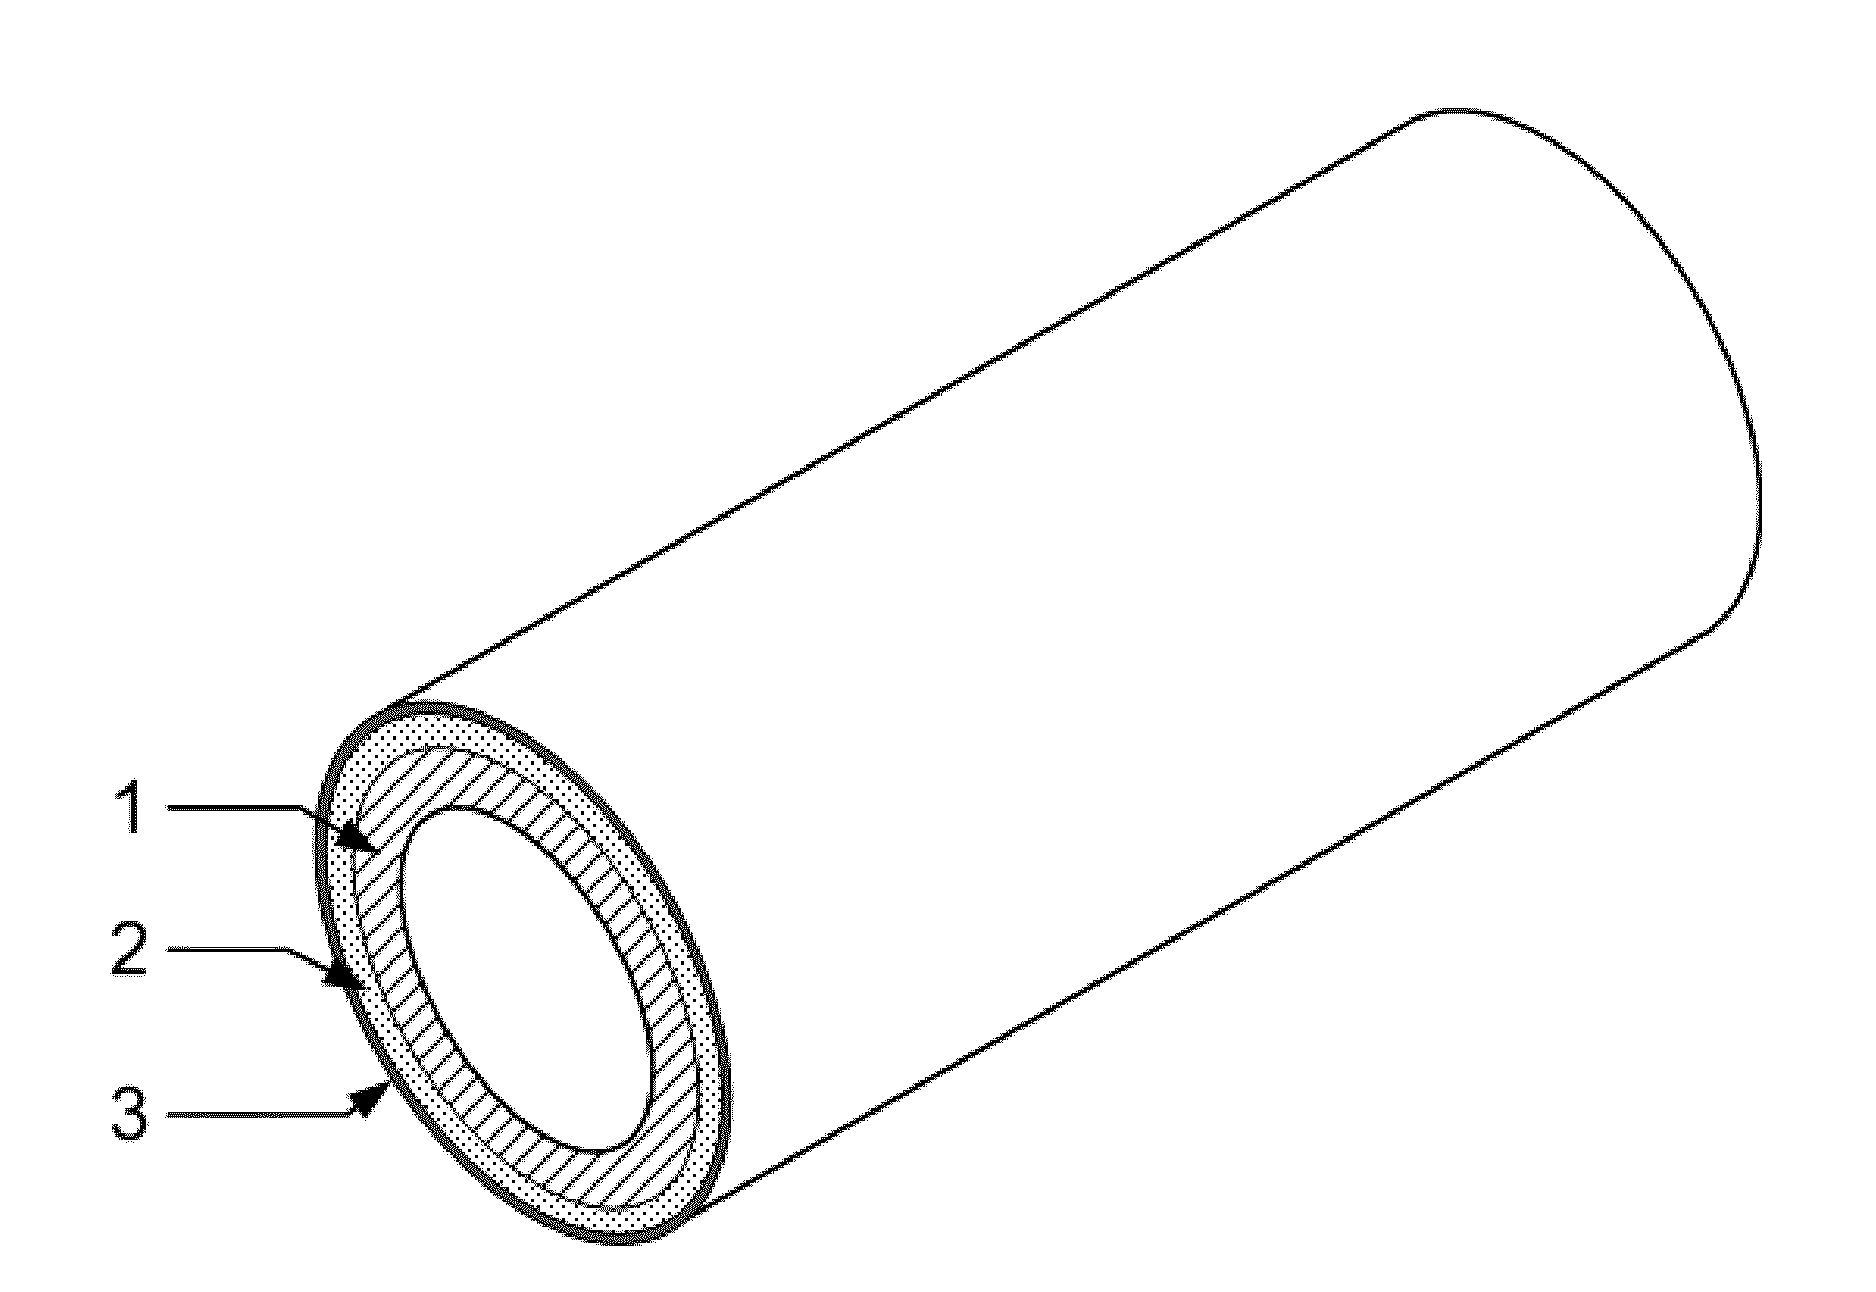 Method of manufacturing rotogravure cylinders